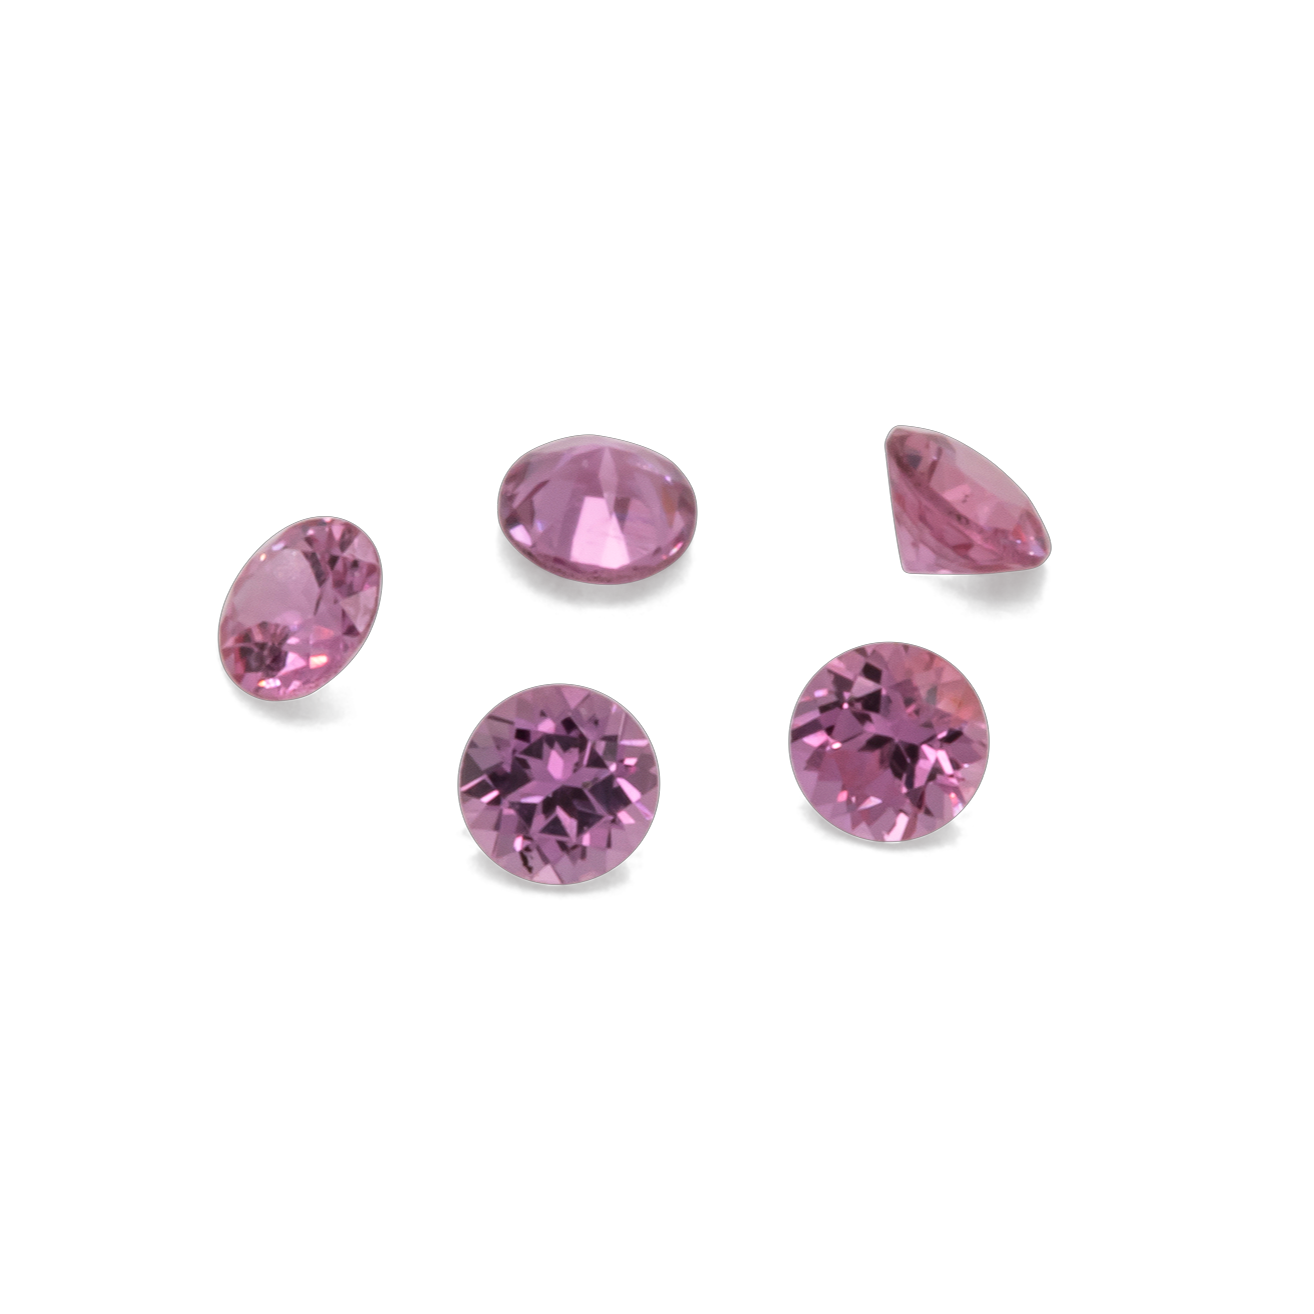 Sapphire - pink, round, 1.5x1.5 mm, approx. 0.02 cts, No. XSR11179